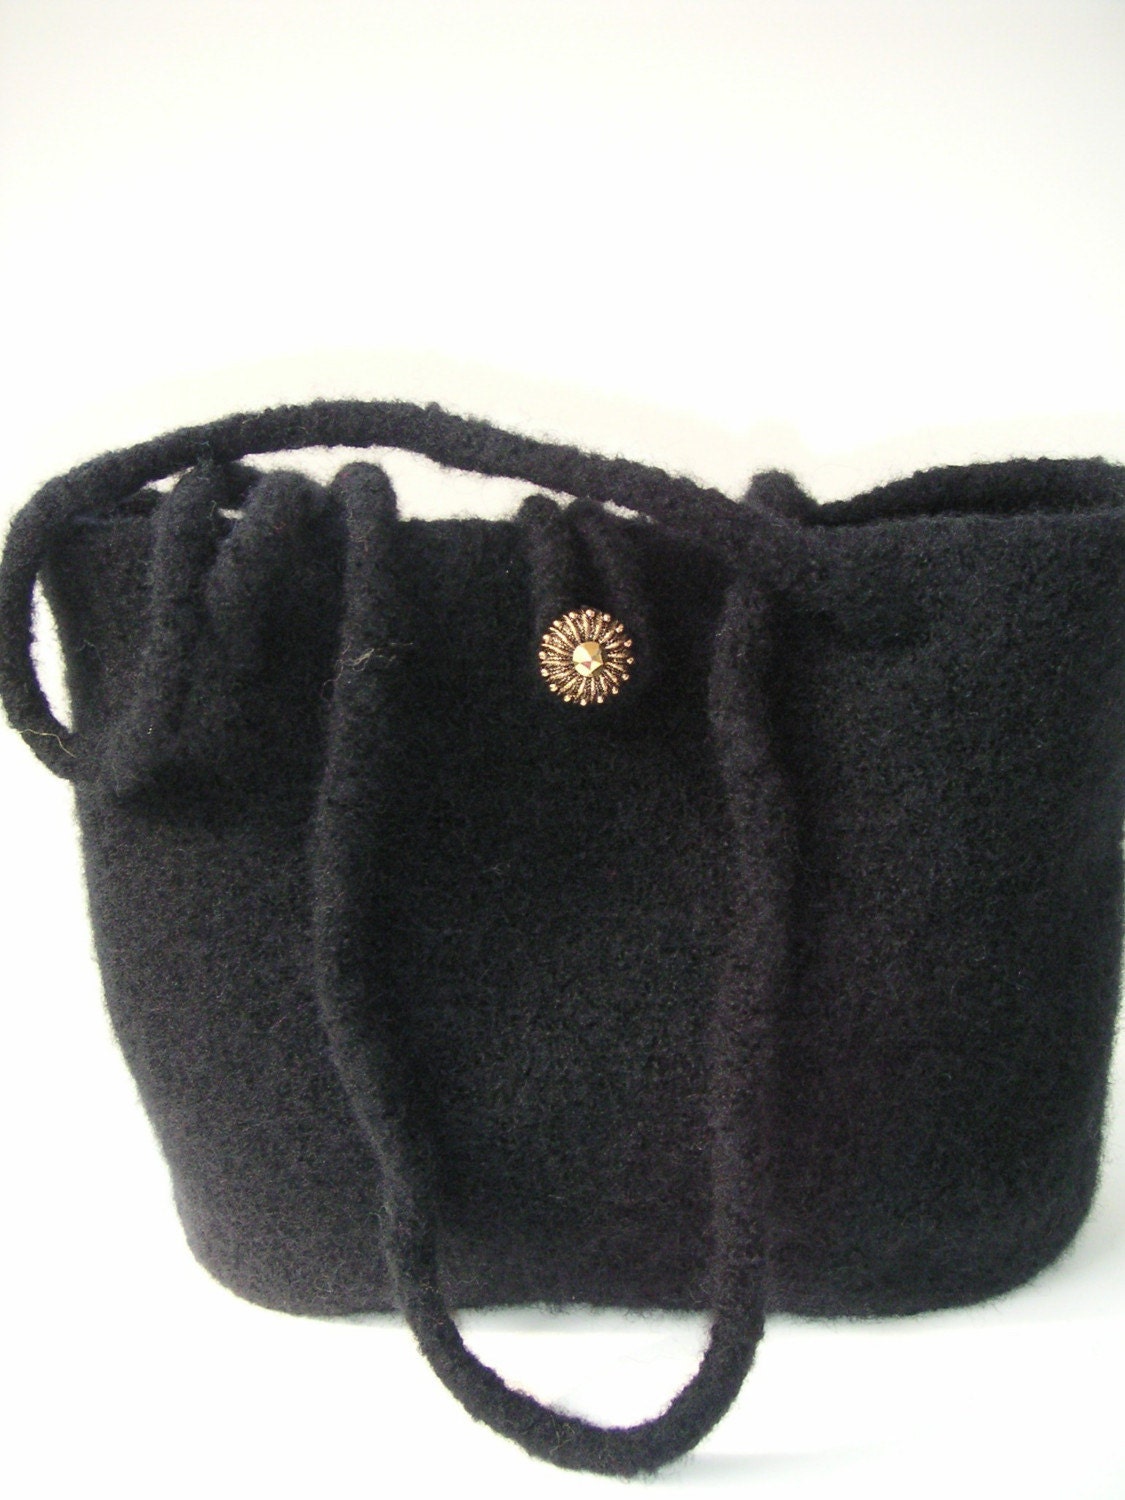 Felted Purse Pattern Free | Reference.com Answers